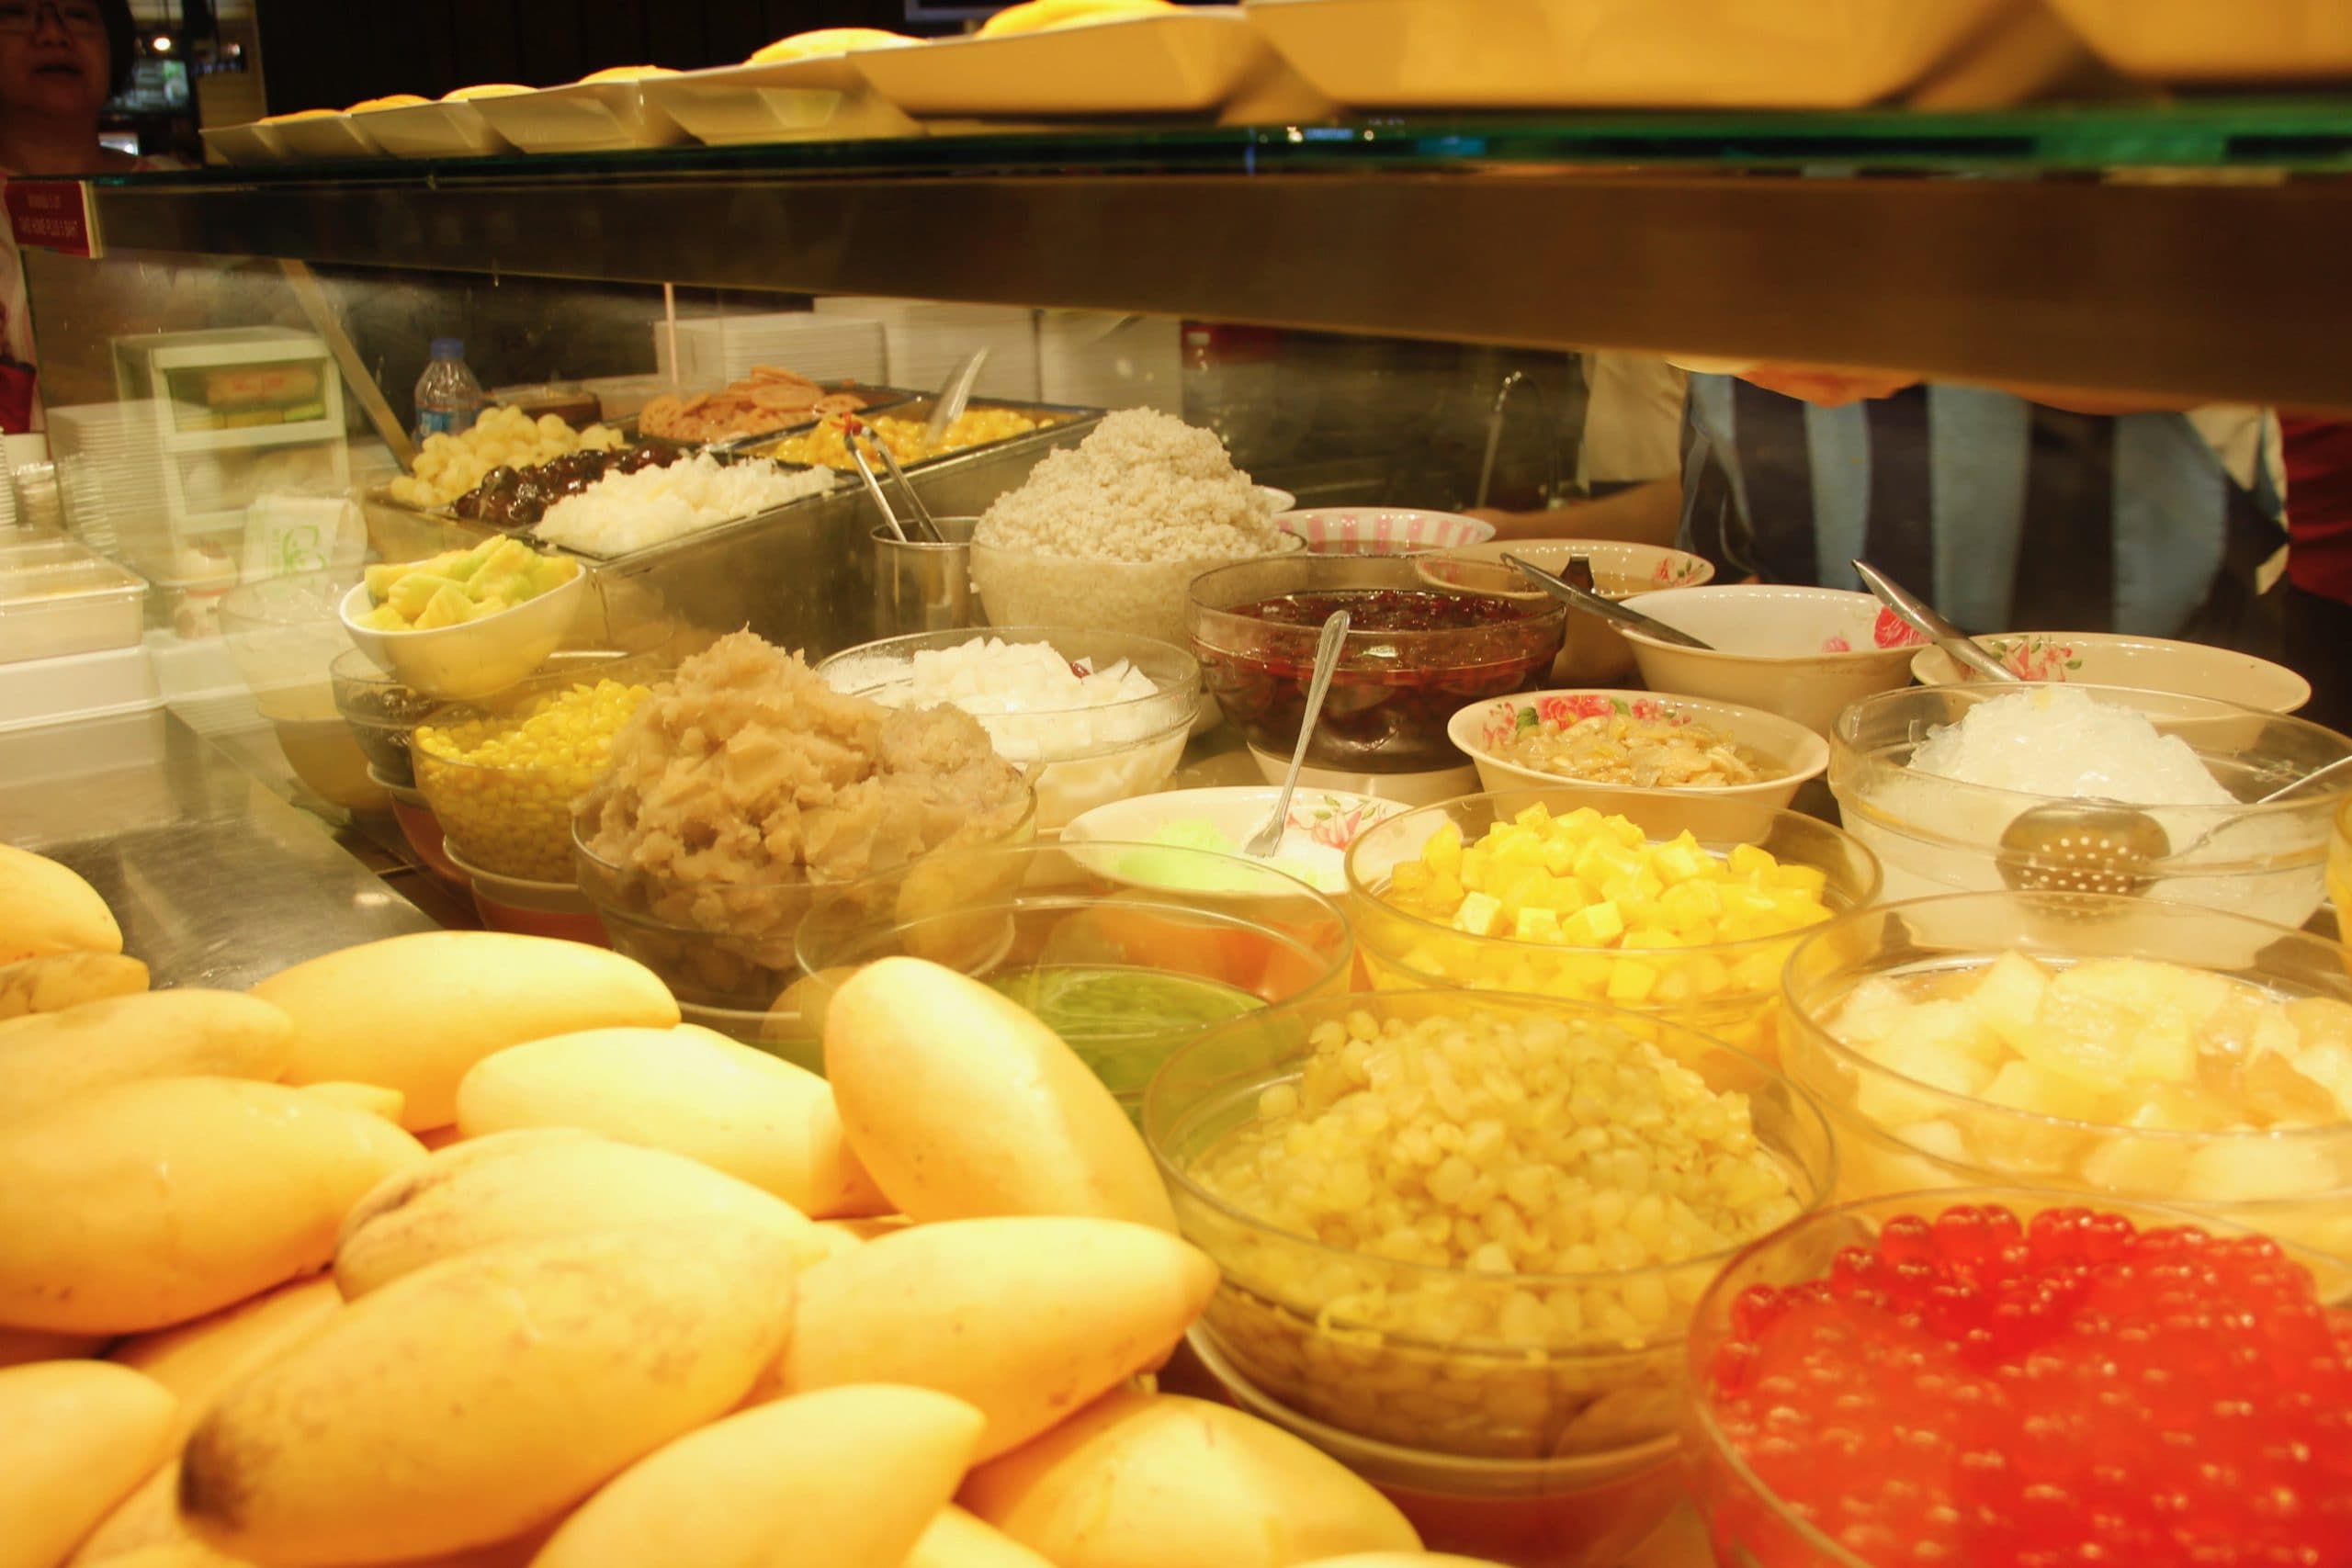 A counter of Cheng tng toppings to choose from